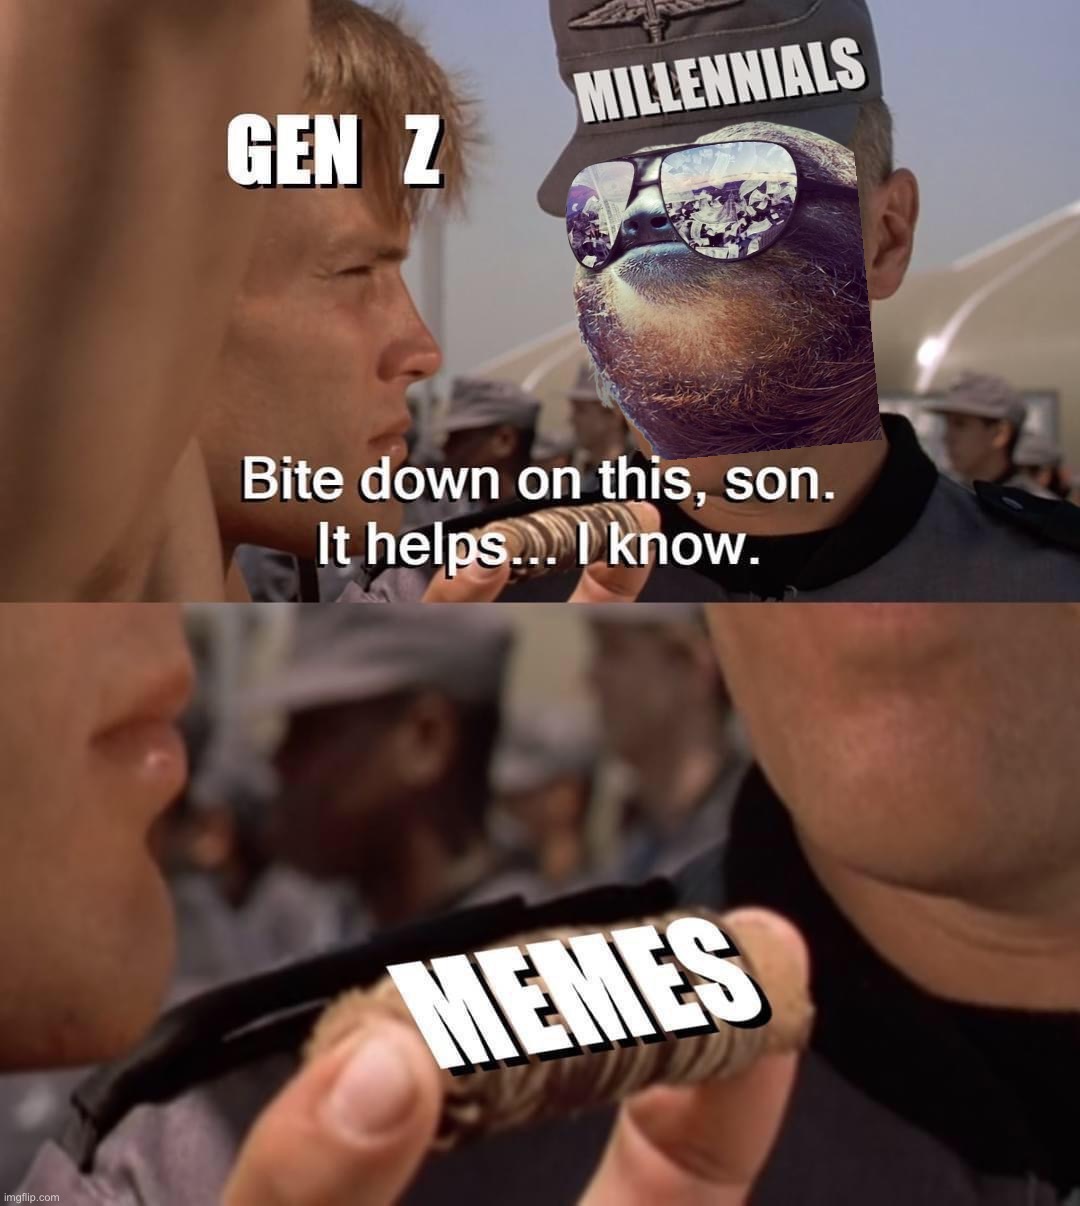 Millennial advice to Gen Z | image tagged in millennial advice to gen z | made w/ Imgflip meme maker